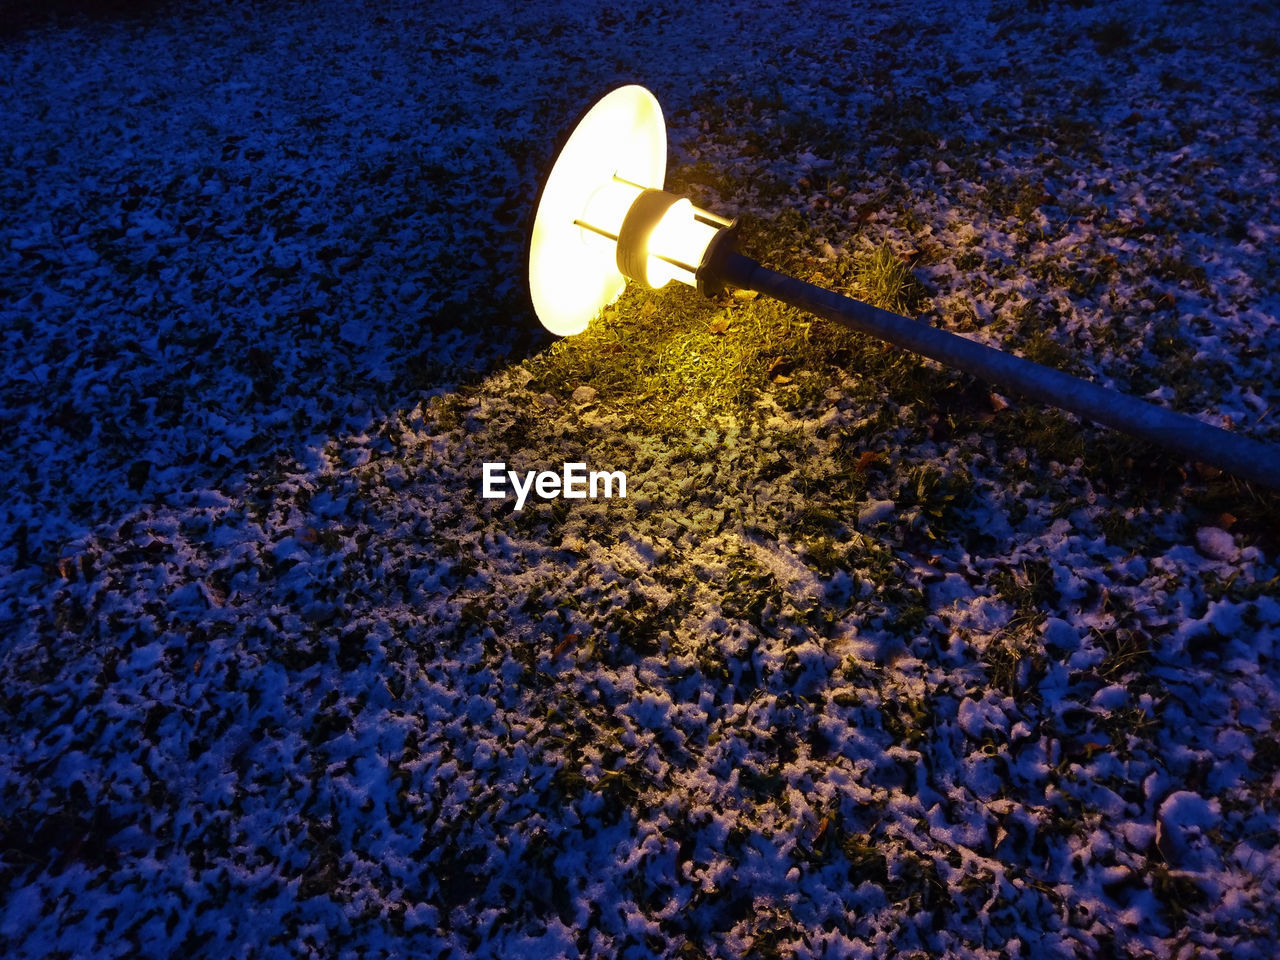 HIGH ANGLE VIEW OF ILLUMINATED STREET LIGHT BY PLANT ON COBBLESTONE